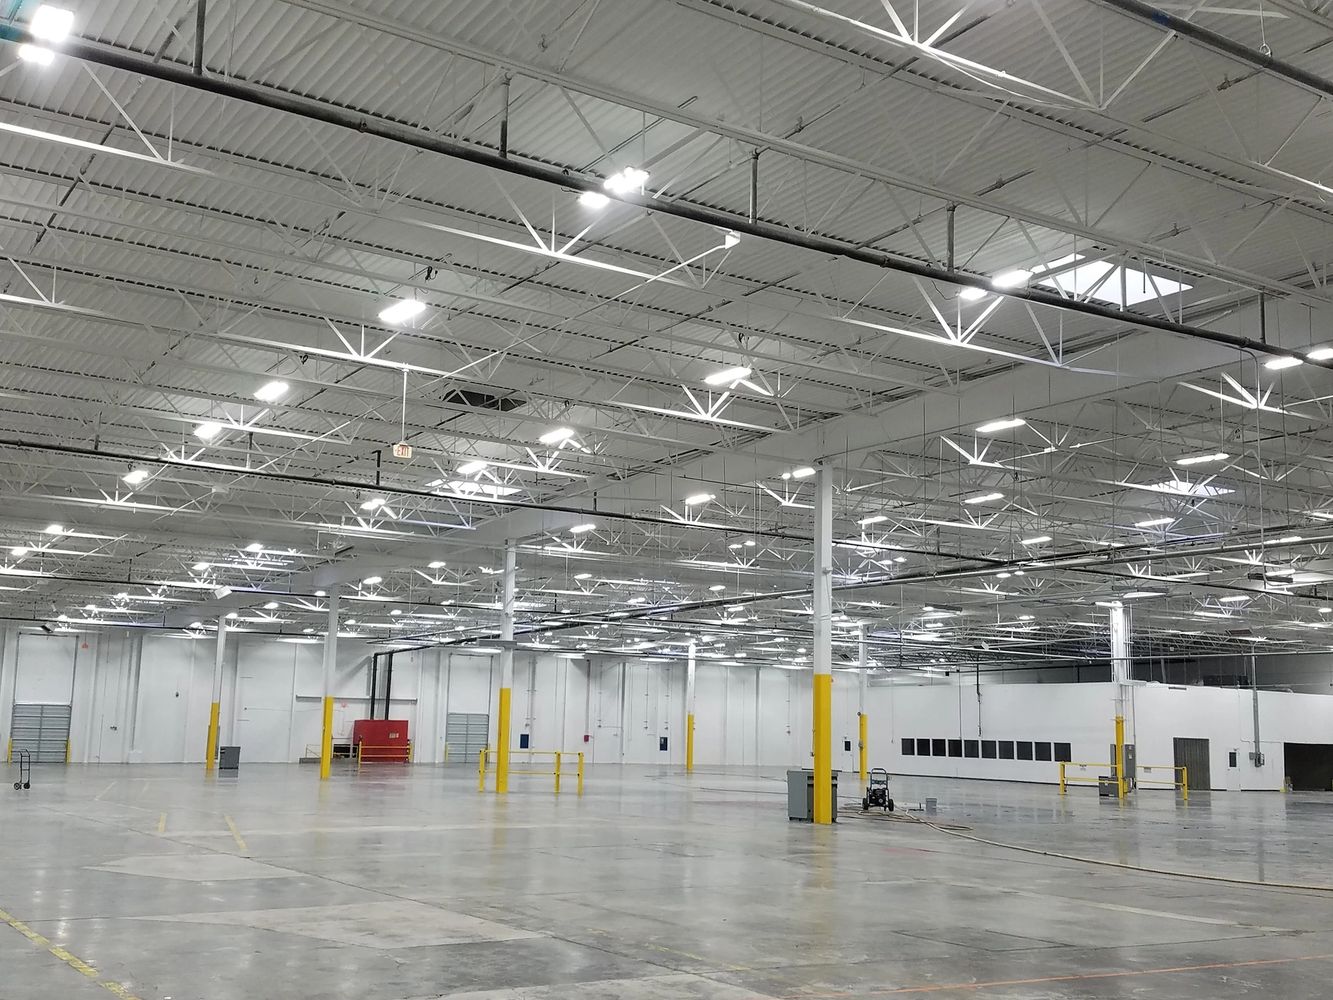 LED Lighting Upgrade, LED High Bays Installed for Commercial, Warehouse and Industrial facilities